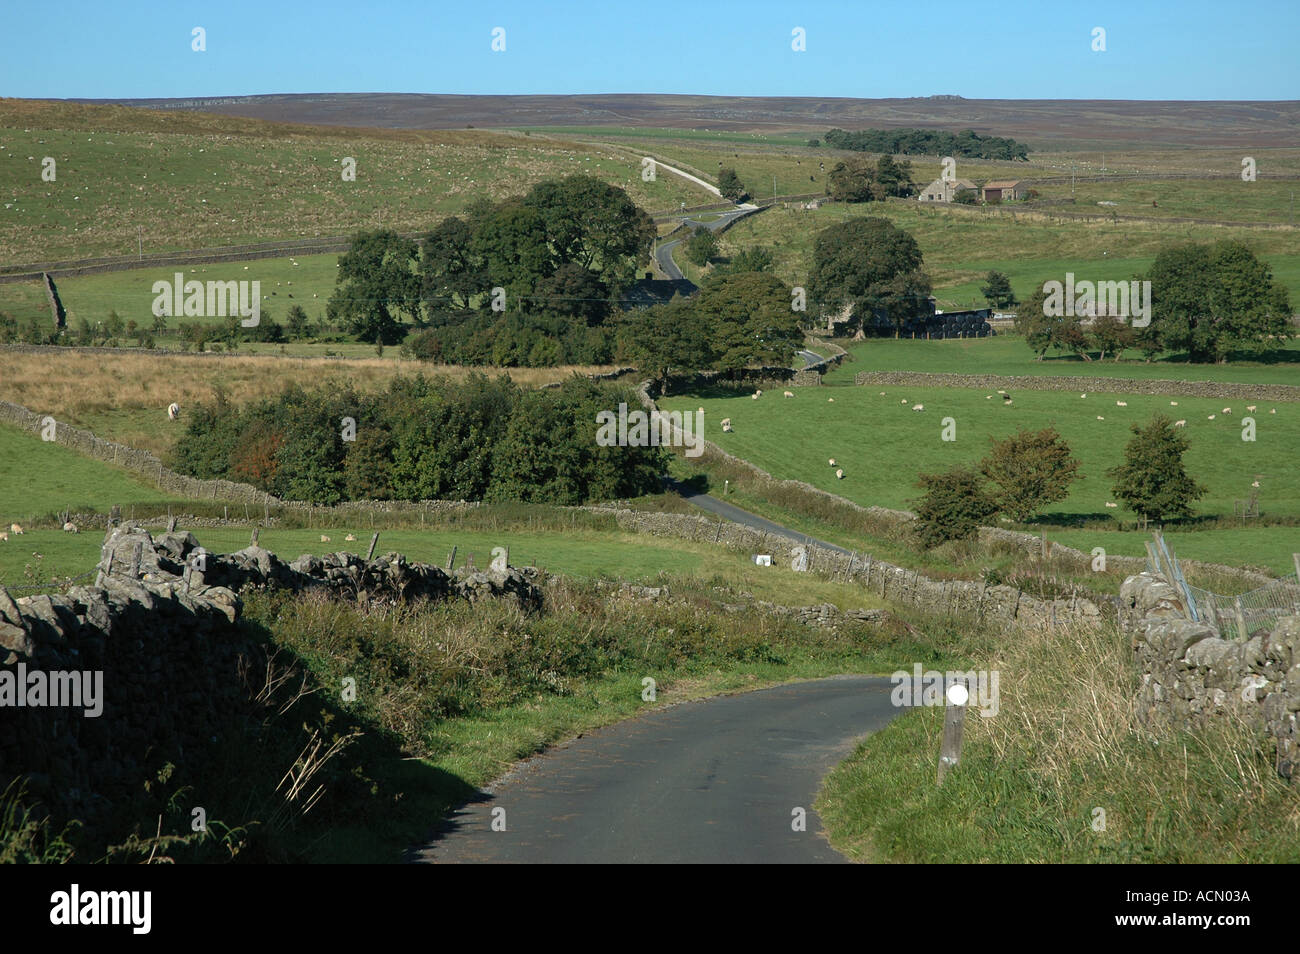 Narrow country road dans le Yorkshire Dales England Banque D'Images